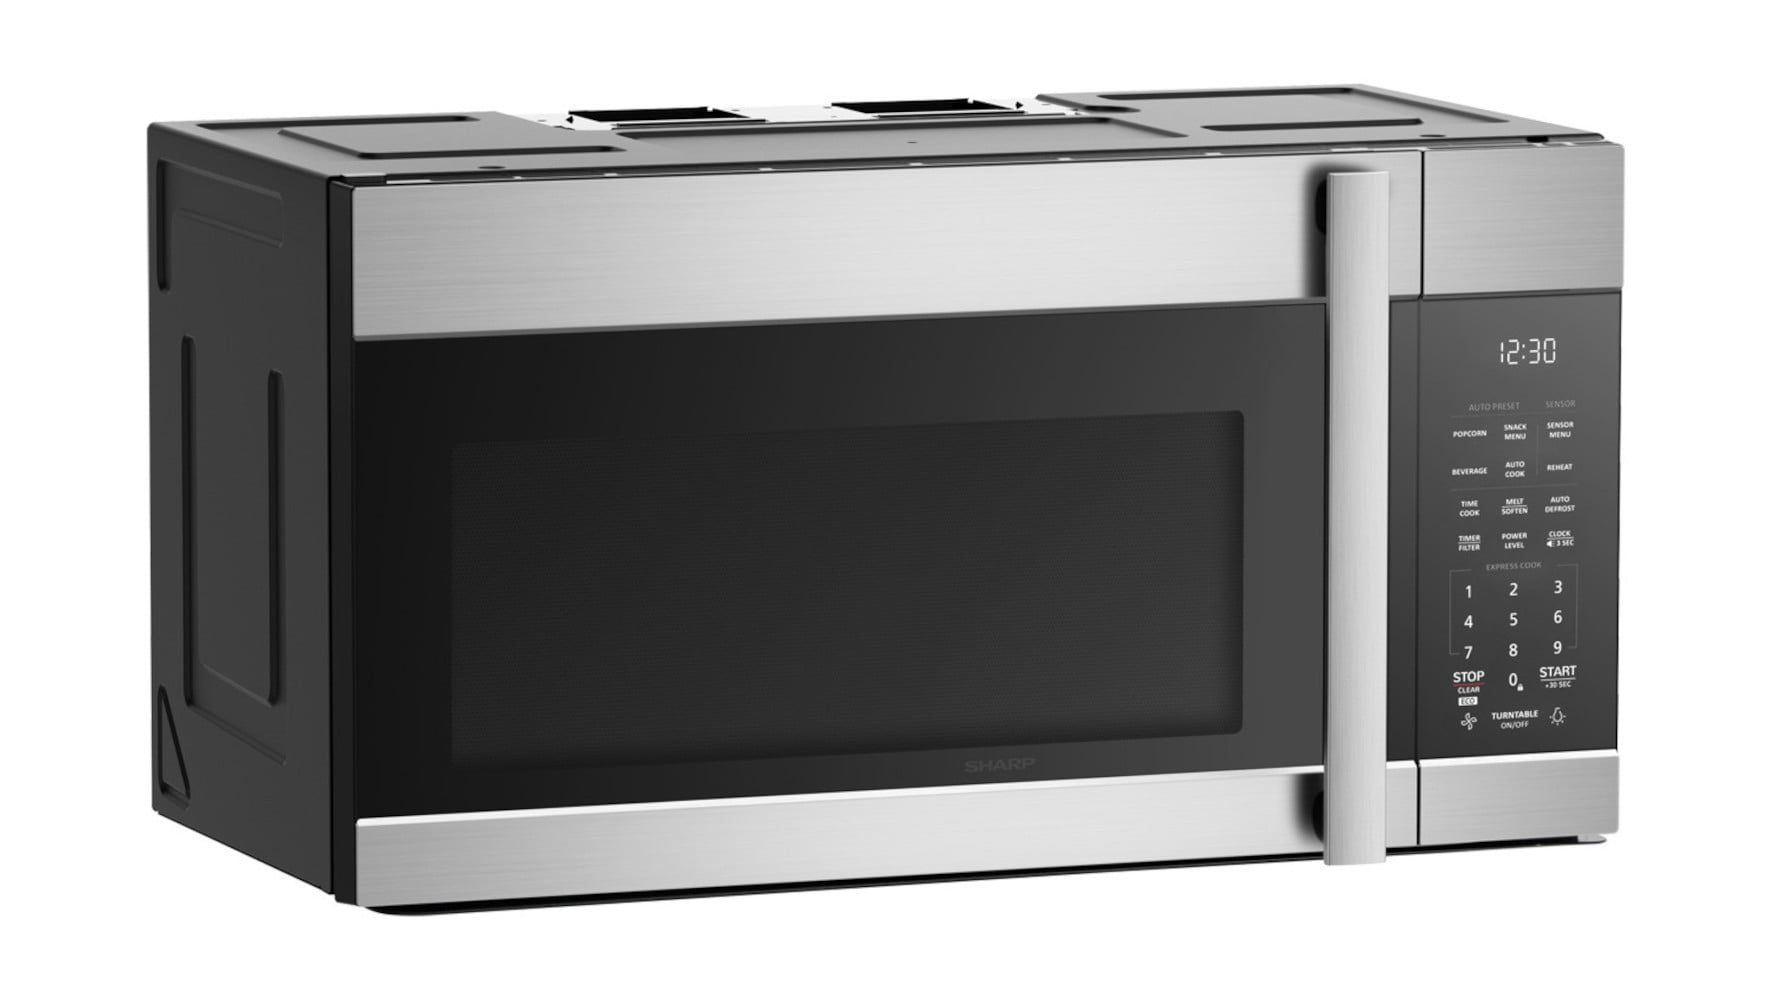 Sharp 1.1 Cu. ft. Stainless Steel Convection Over-the-range Microwave Oven